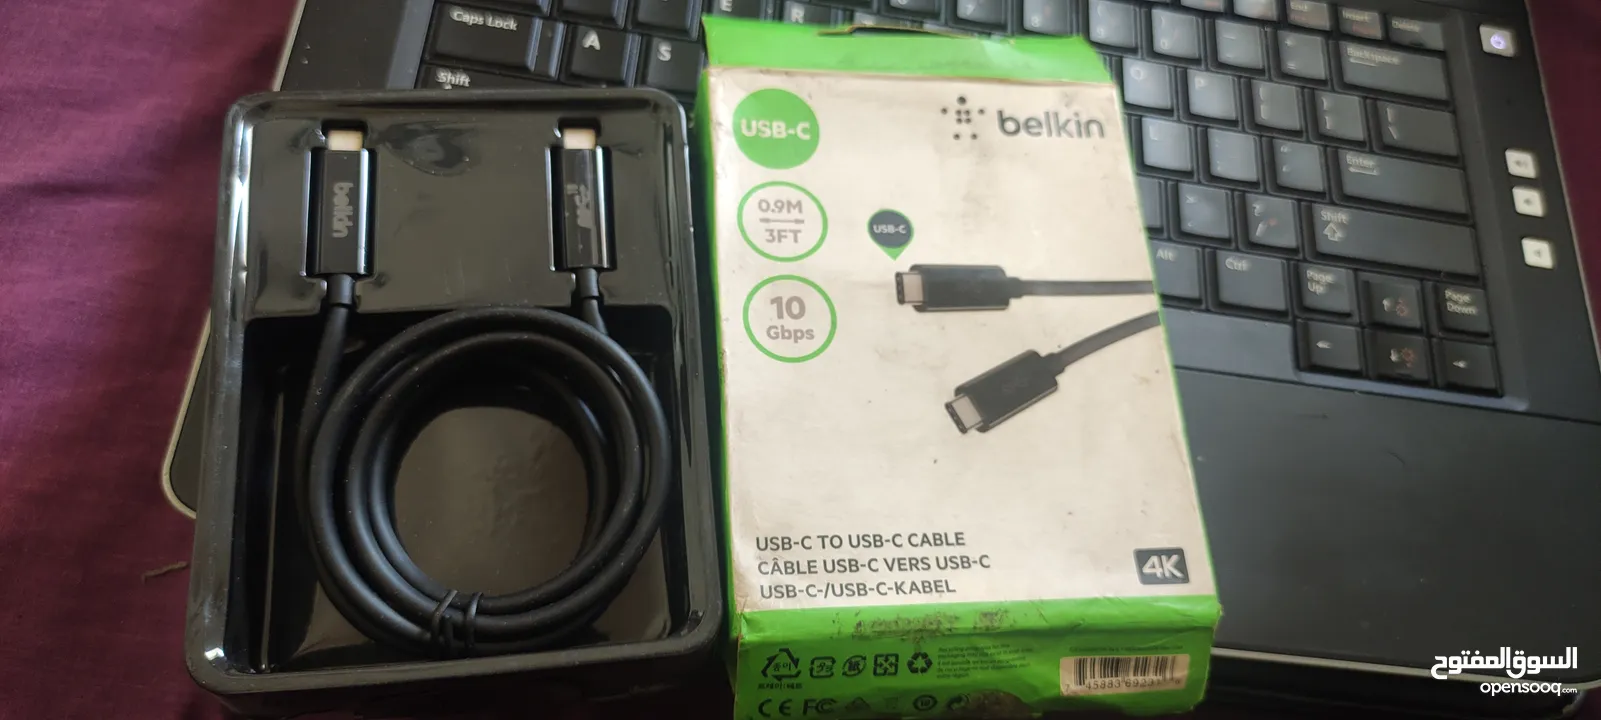 Usb Type C cable - Belkin original (10Gbps transfer rate)